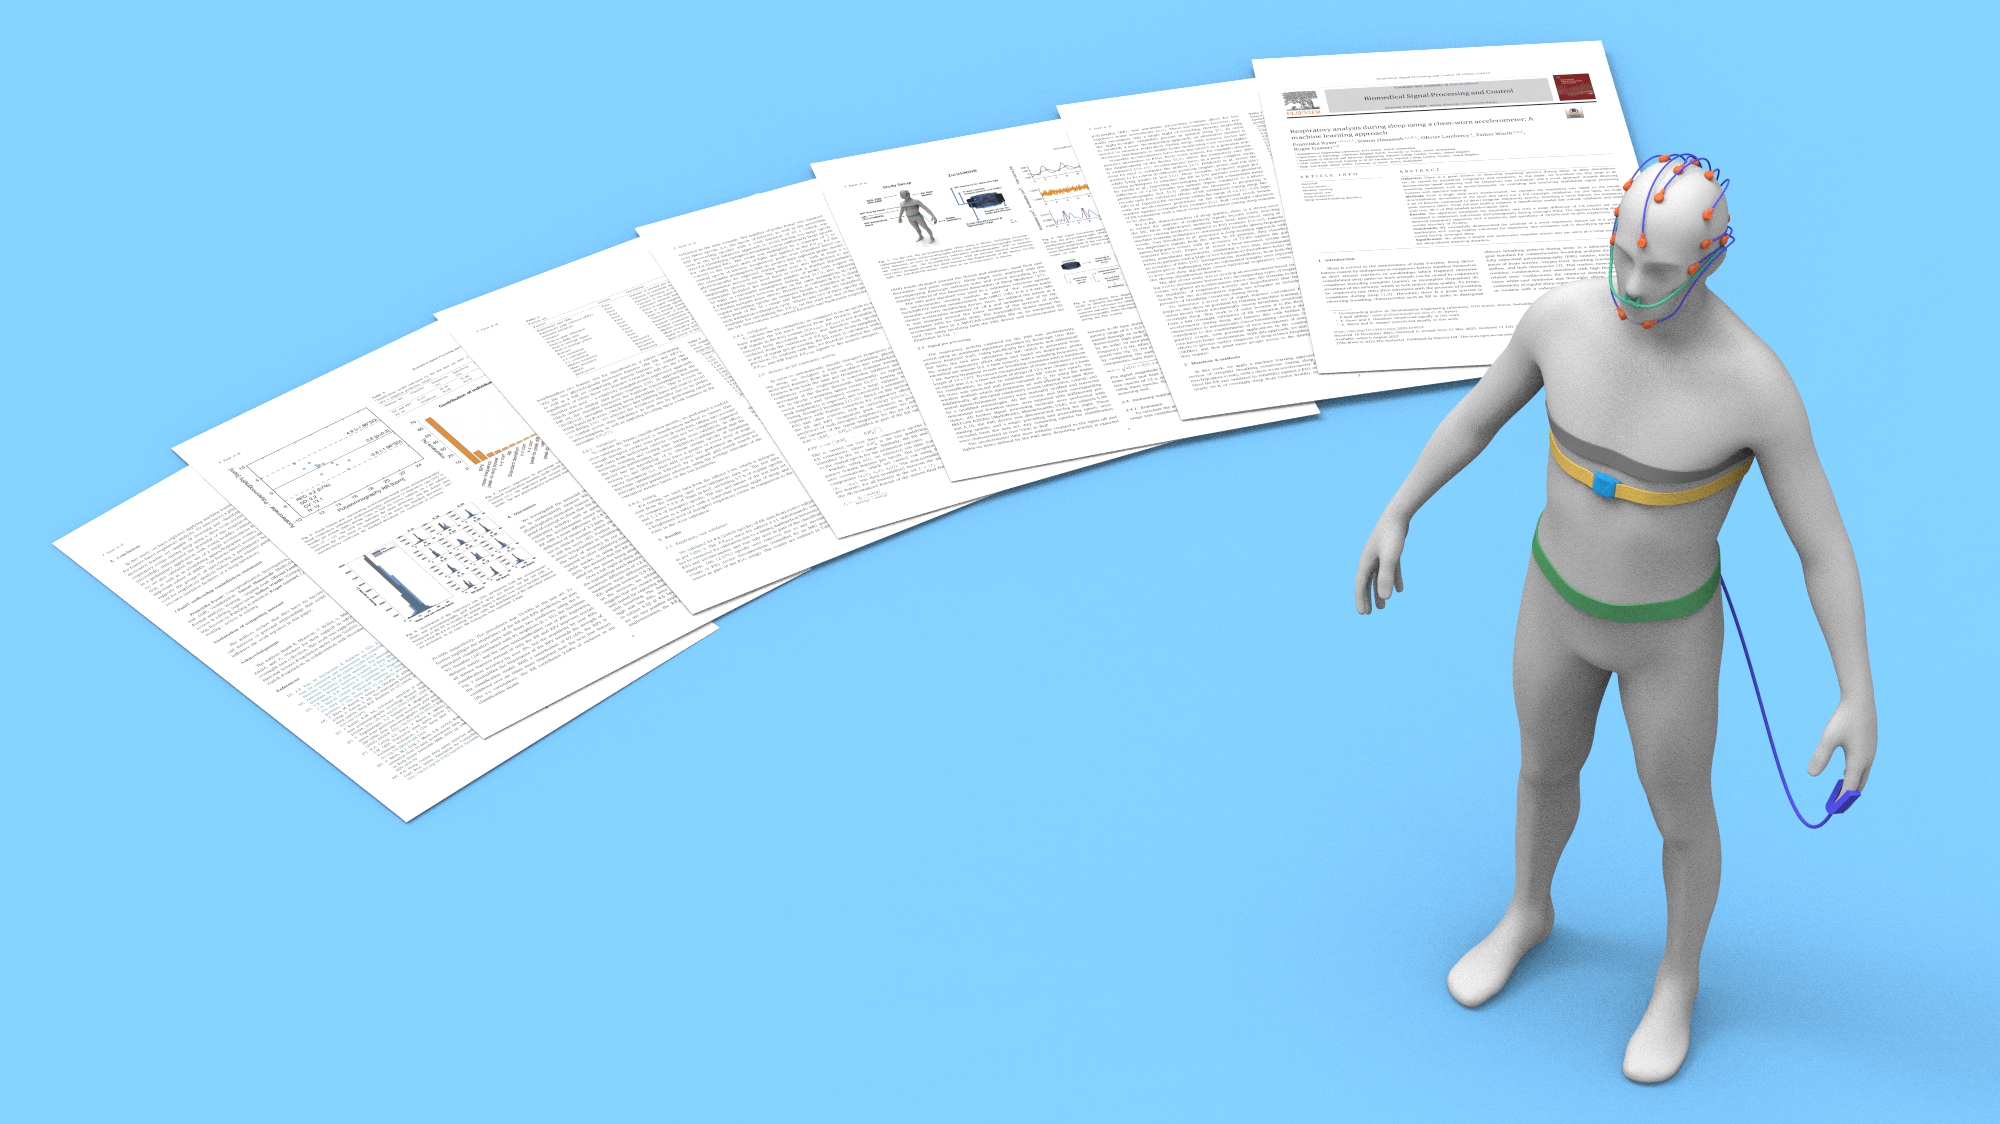 Enlarged view: Visualisation with 3D Manekin and Publication